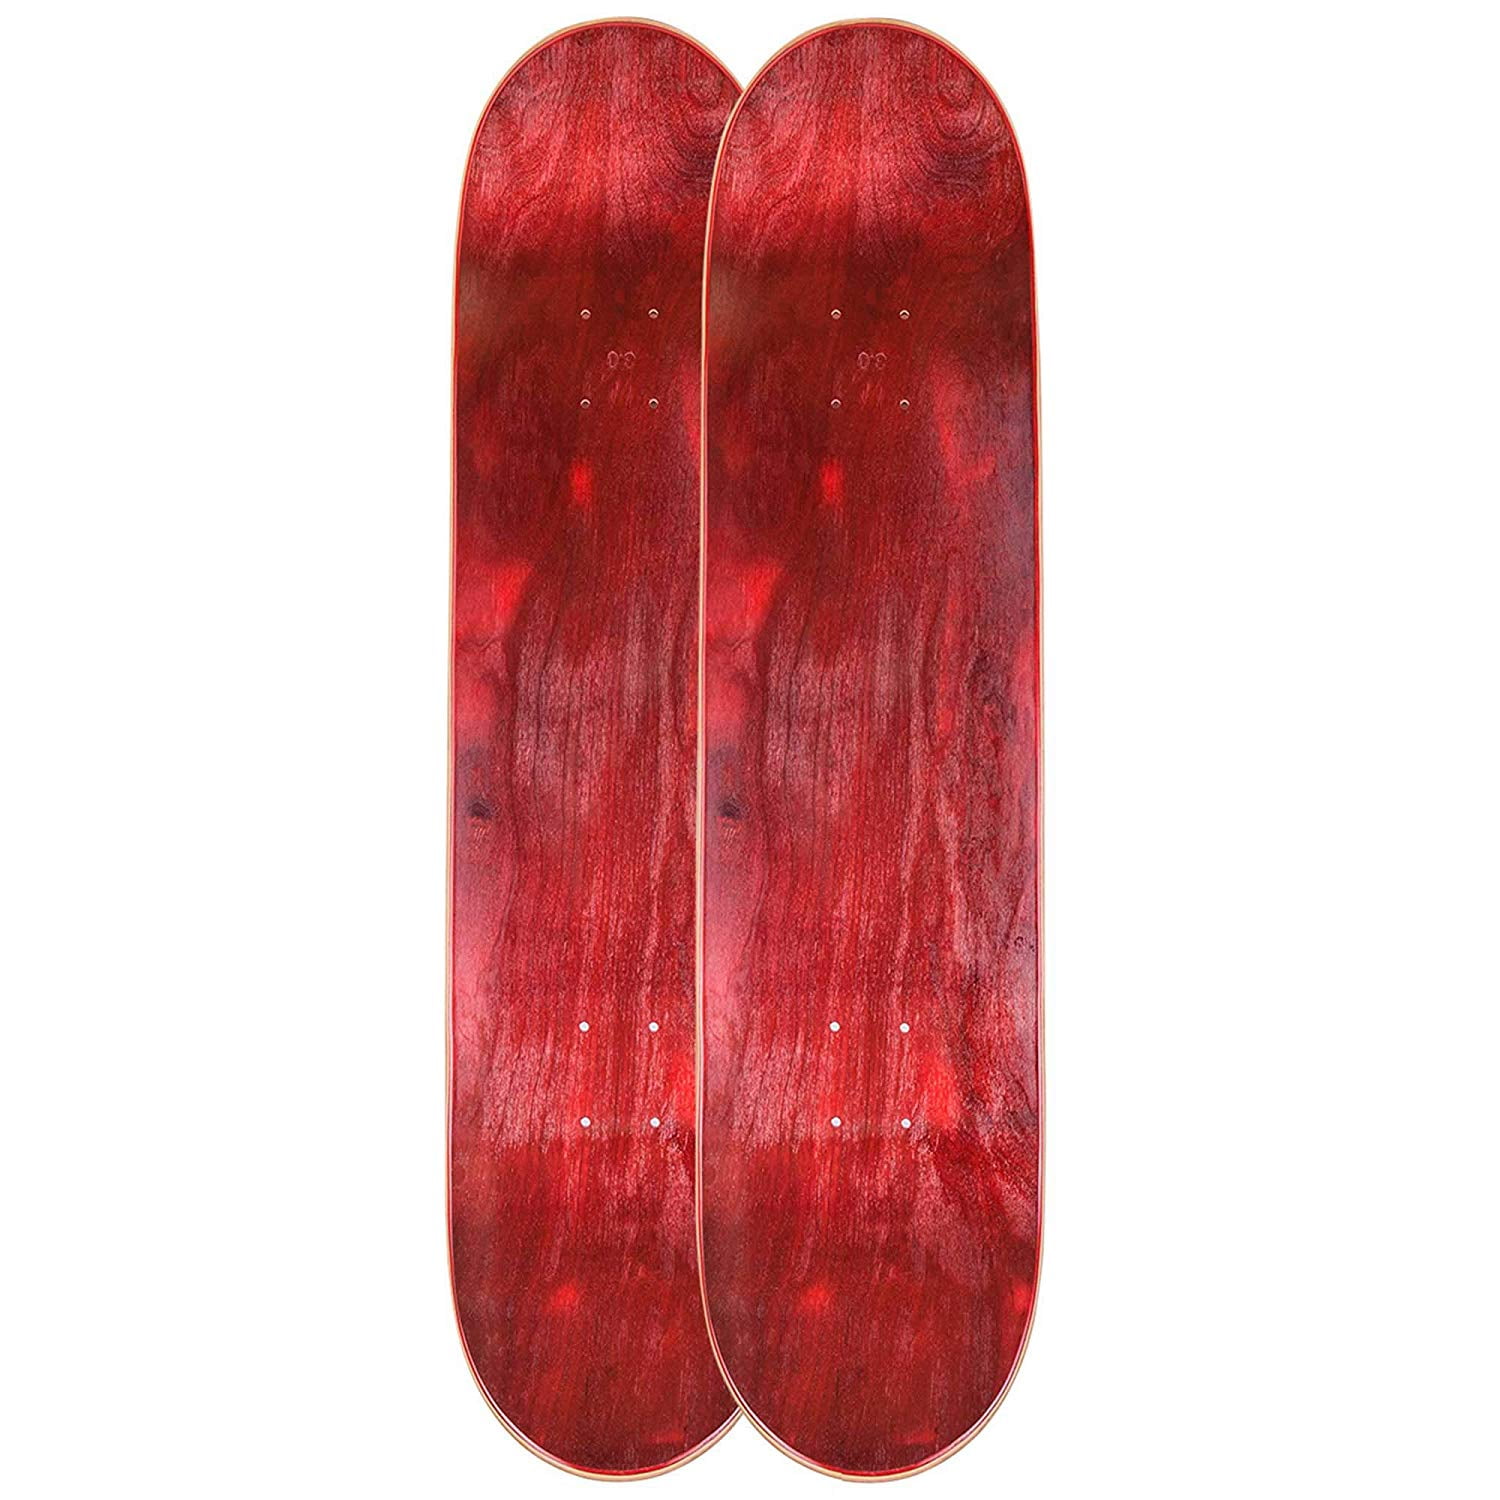 Cal 7 Blank Maple Skateboard Decks with Grip Tape Bundle of 3, Combinations 